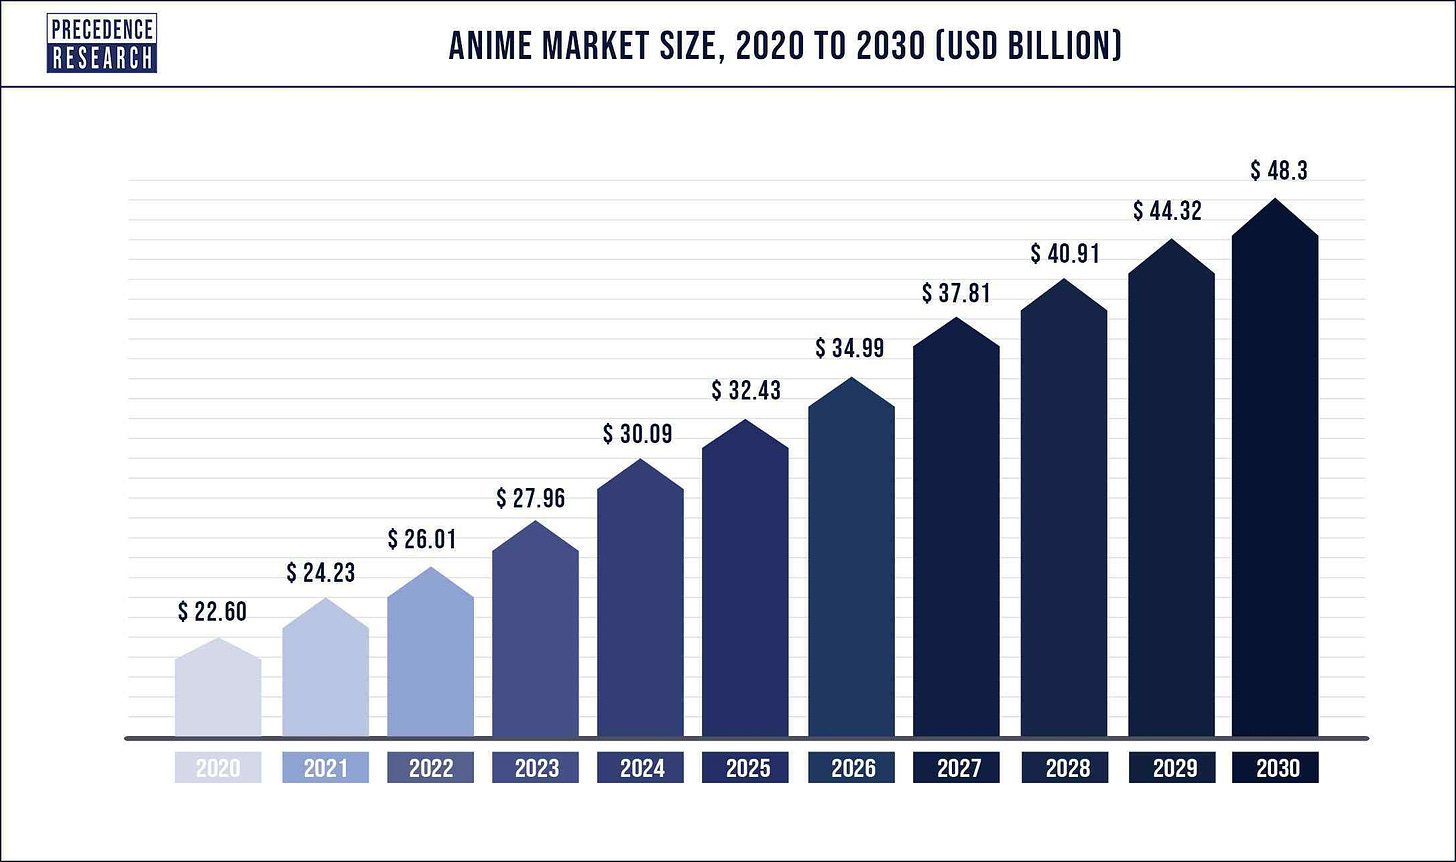 Anime Market Size Expected to Reach US$ 48.3 Billion by 2030